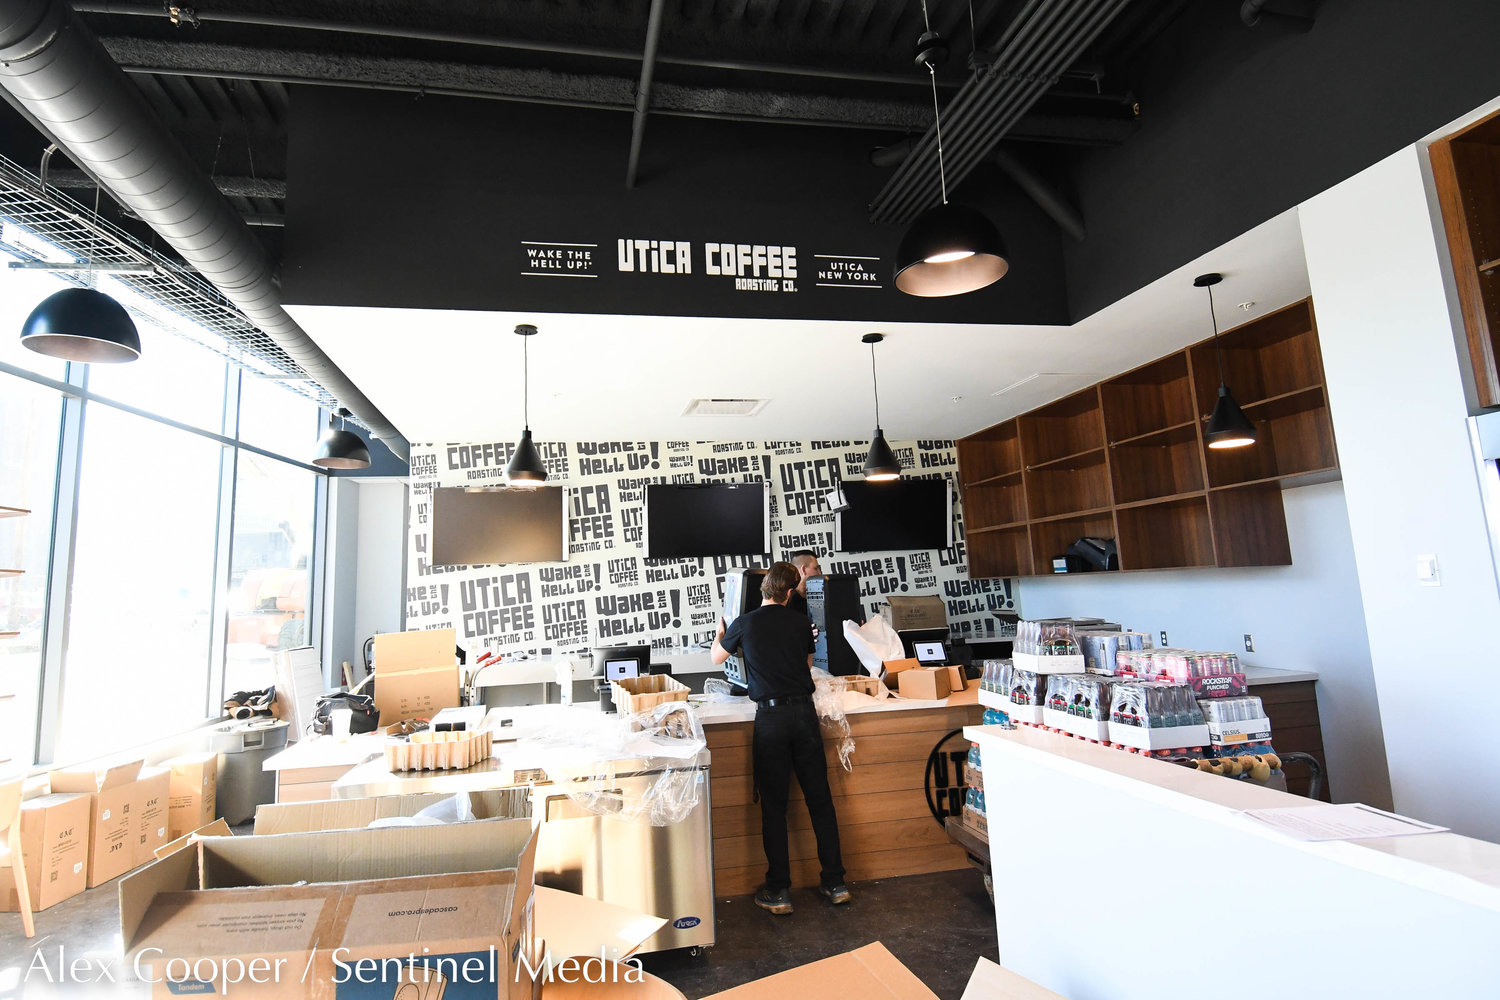 Workers set up a Utica Coffee Roasting Co. cafe inside the Nexus Center on Wednesday, Nov. 9 in Utica. The inaugural game will take place tonight between the NCDC Utica Jr. Comets and the Mercer Chiefs. The first tournament will take place from Nov. 11 to 13 for youth hockey teams.